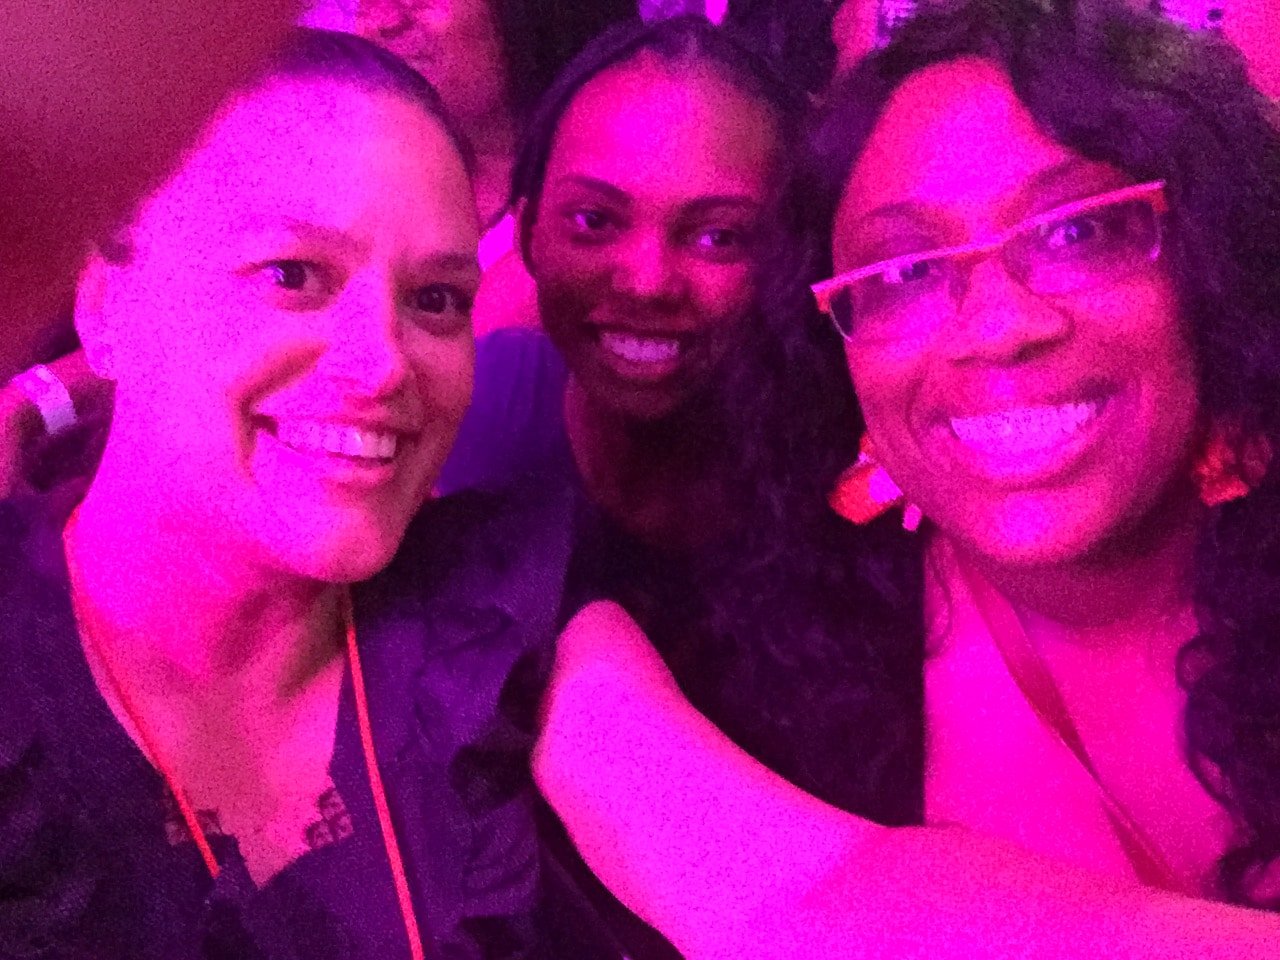 Hanging with our APS teachers at the Janelle Monae concert!